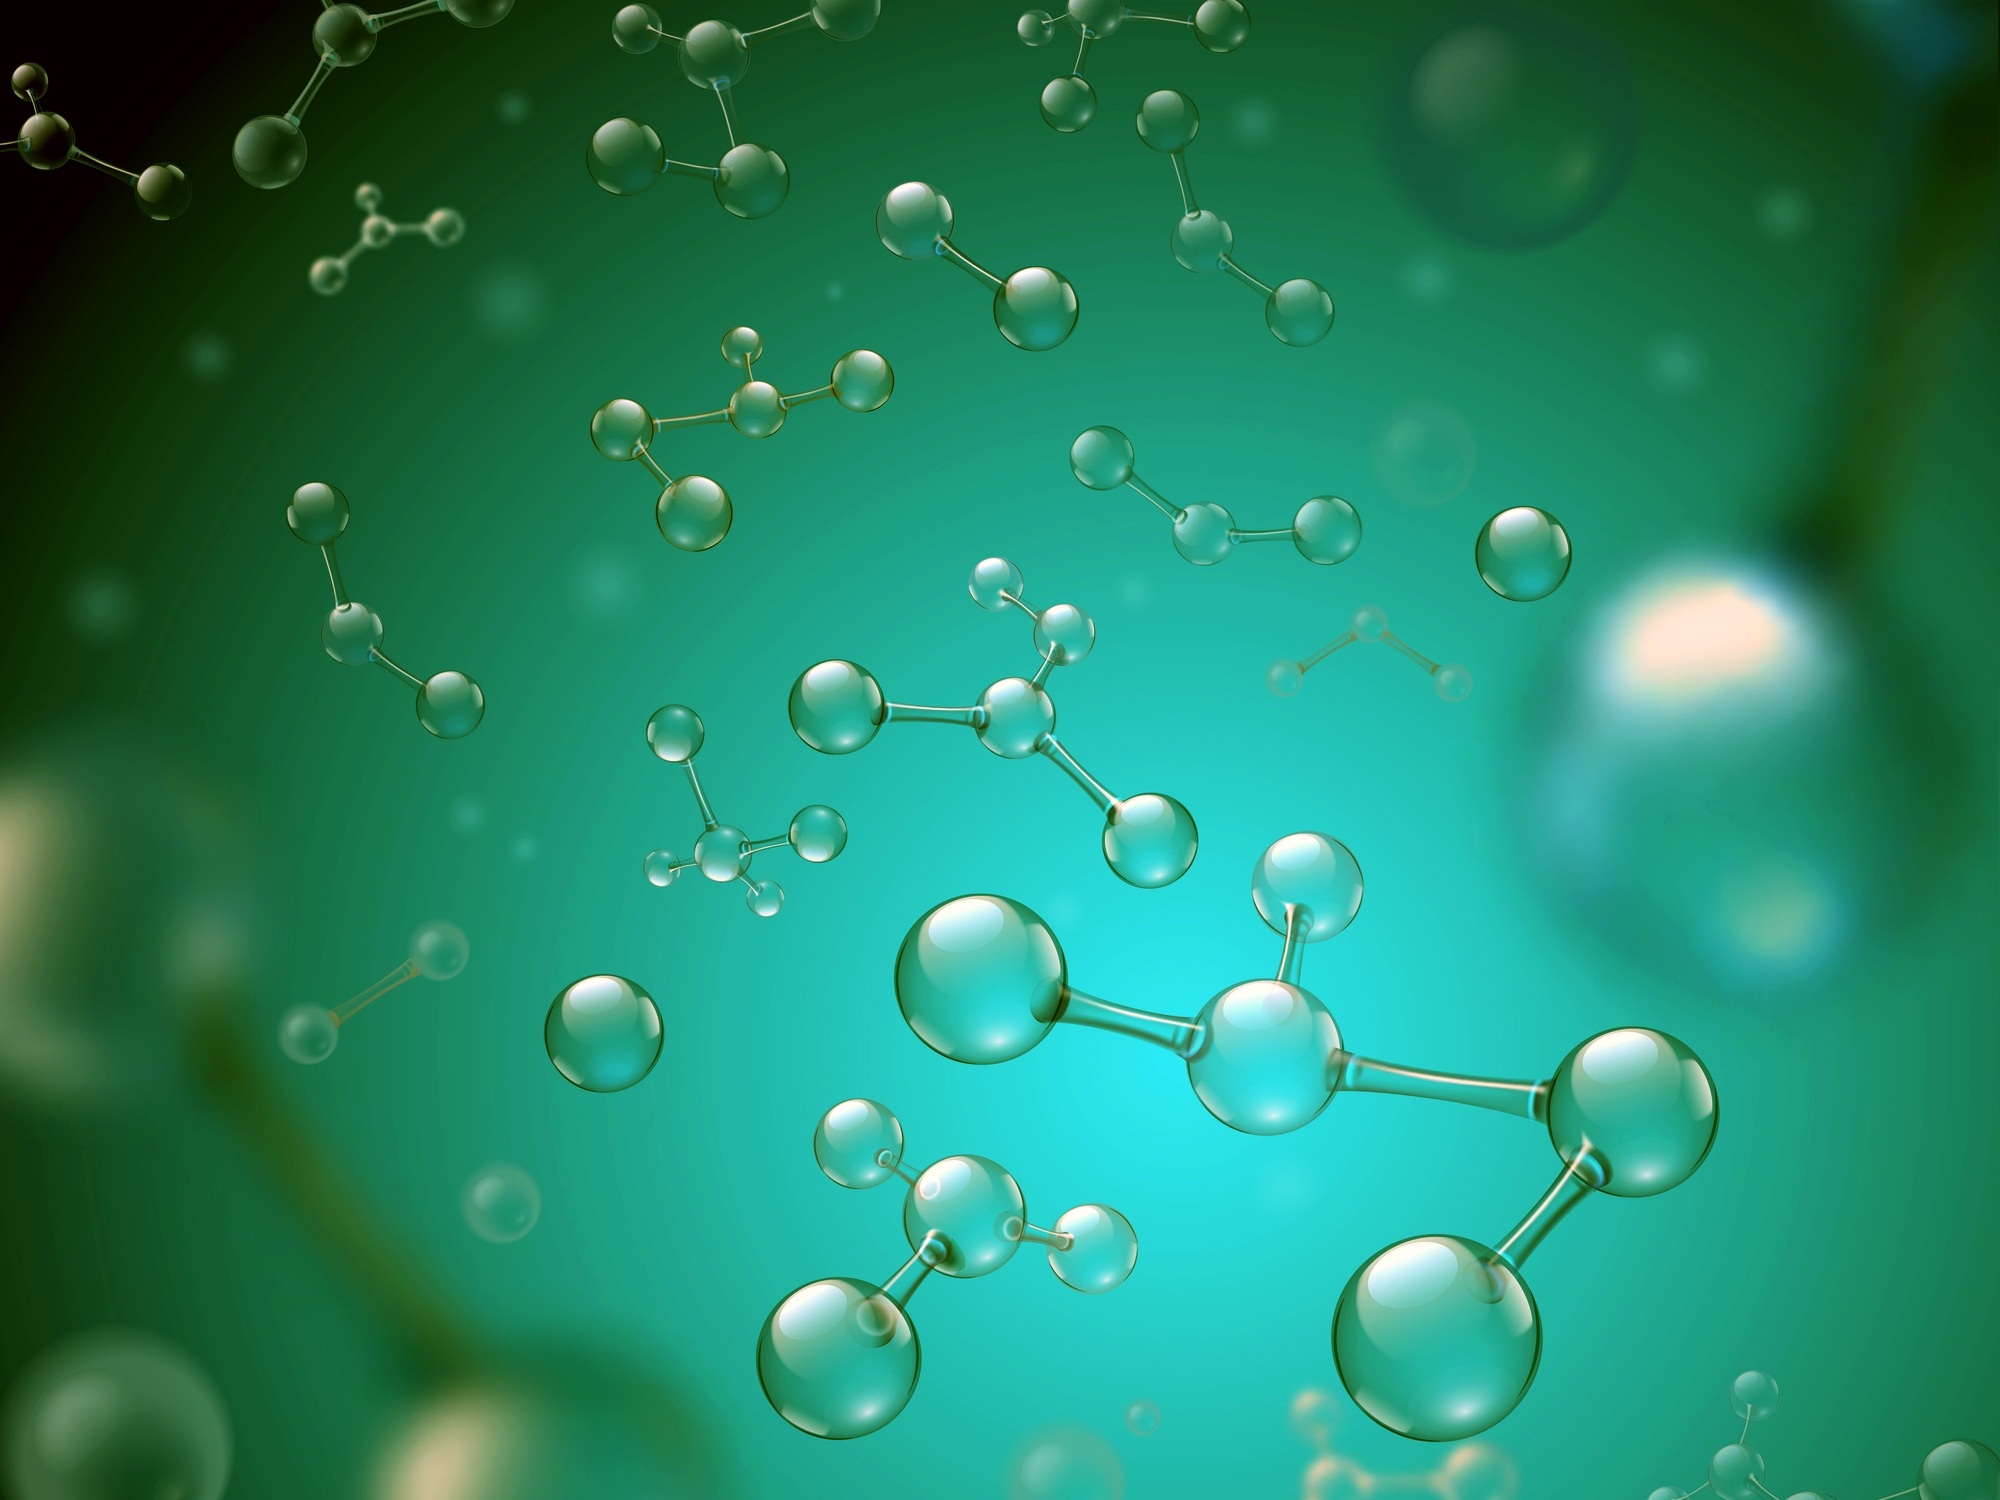 concept illustration of water and other molecules